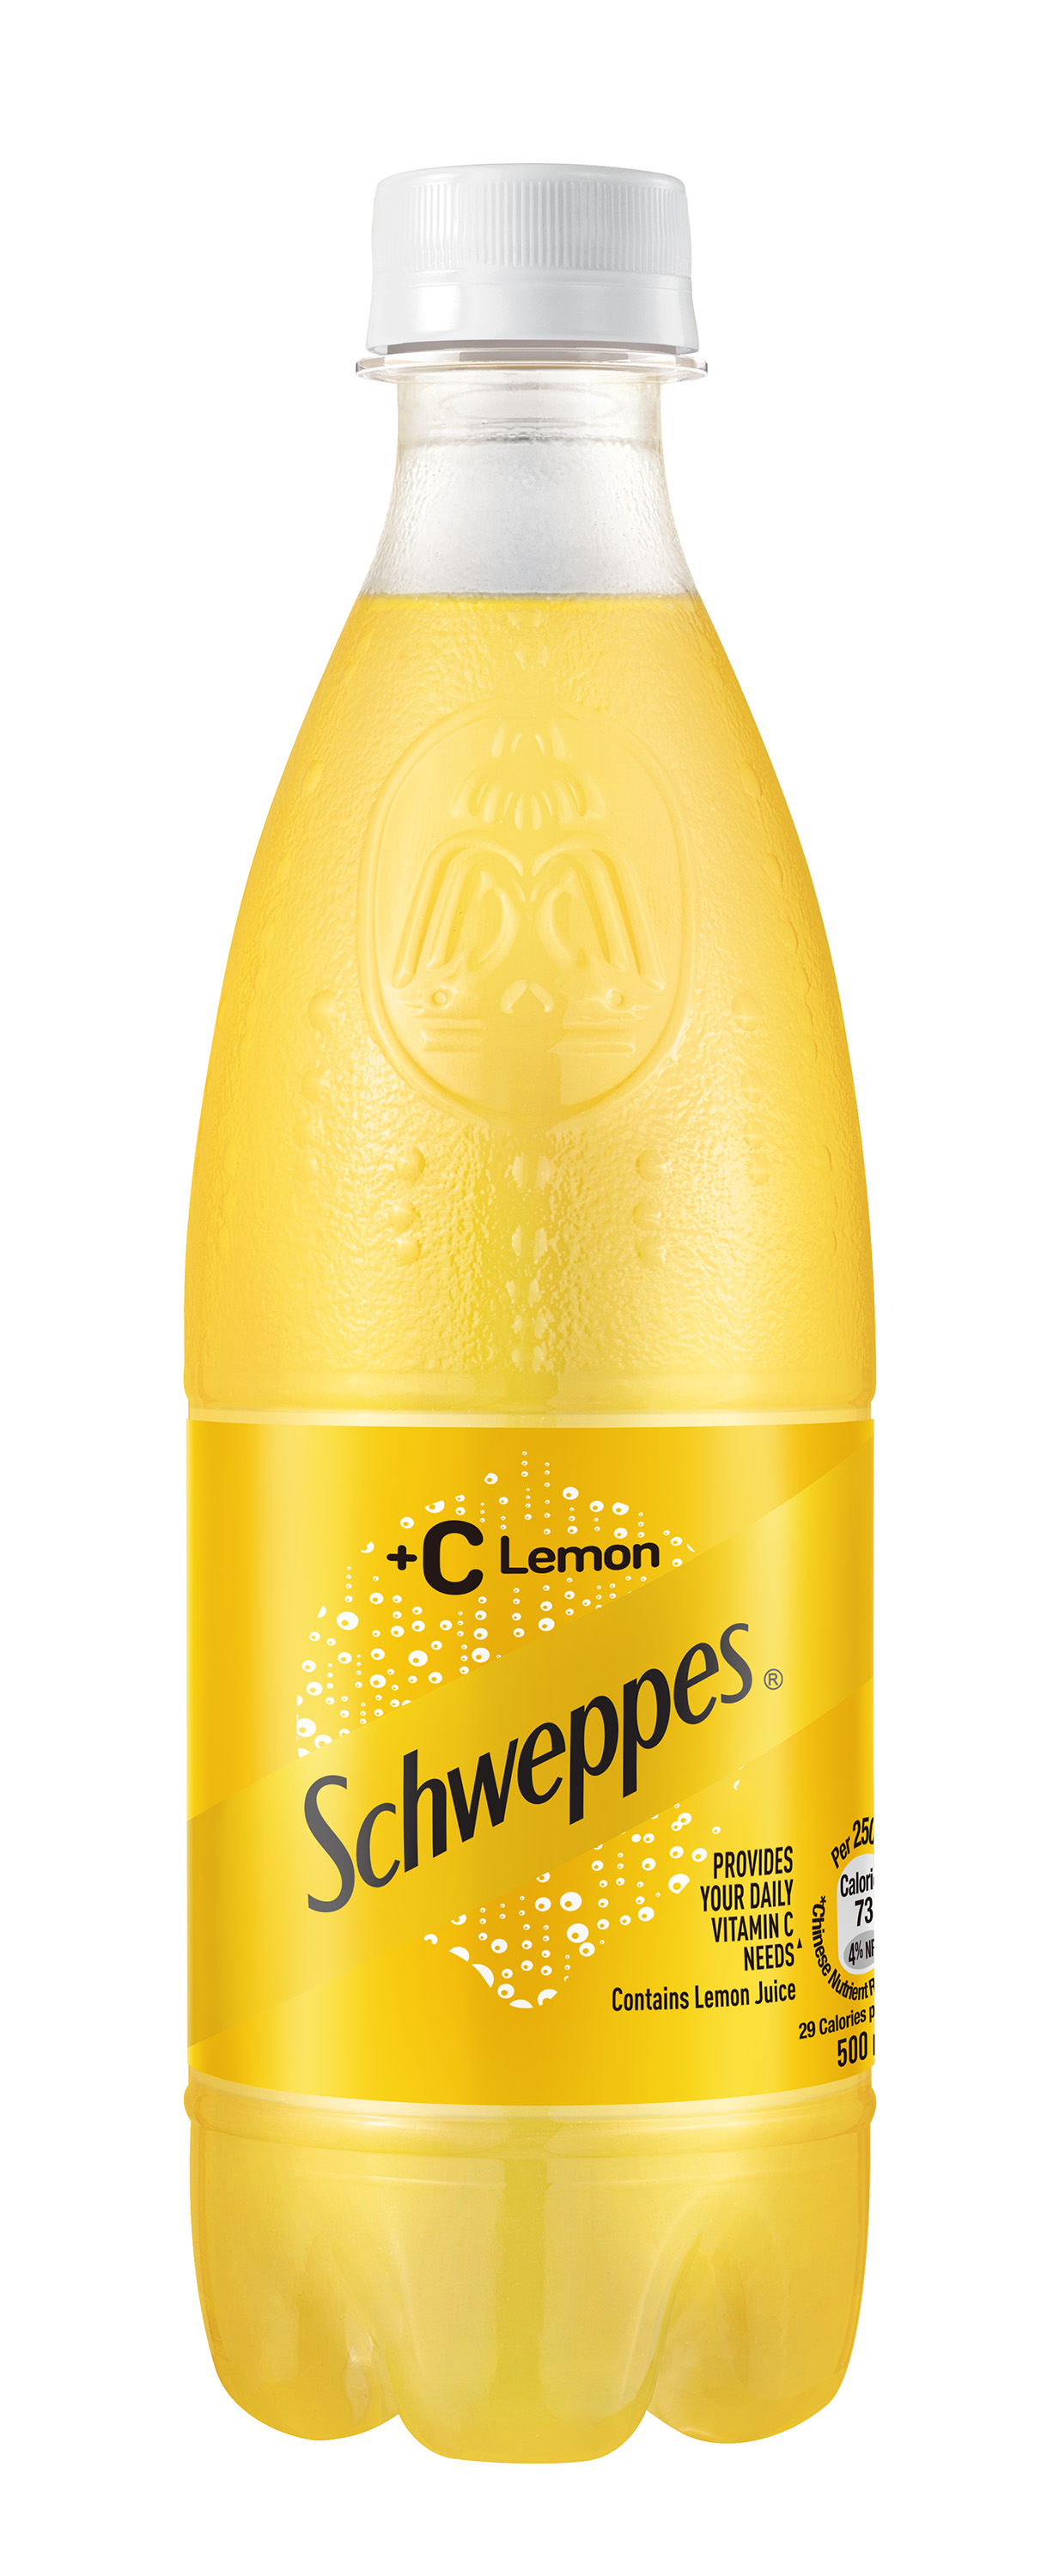 Schweppes +C can